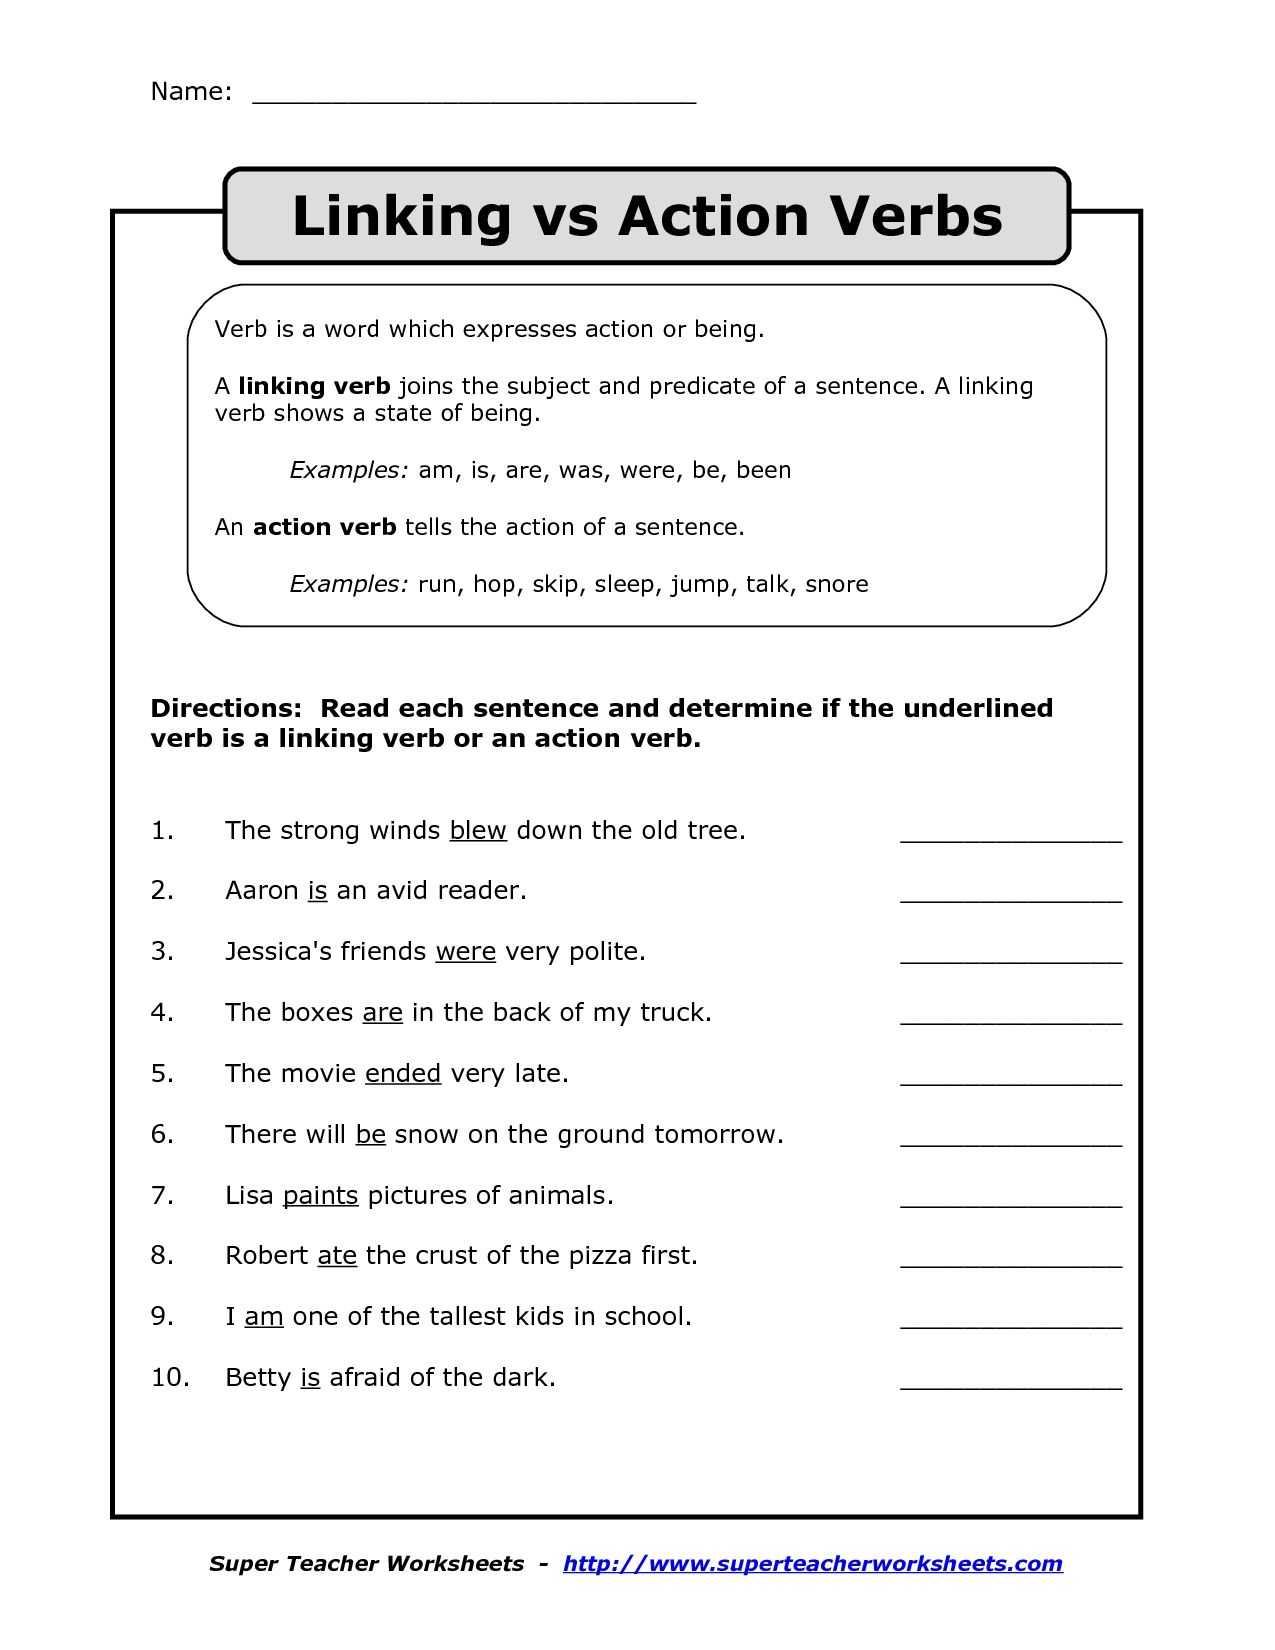 Cause and Effect Worksheets 2nd Grade with Study Action and Linking Verbs Worksheet 5th Grade Danasrhgtop